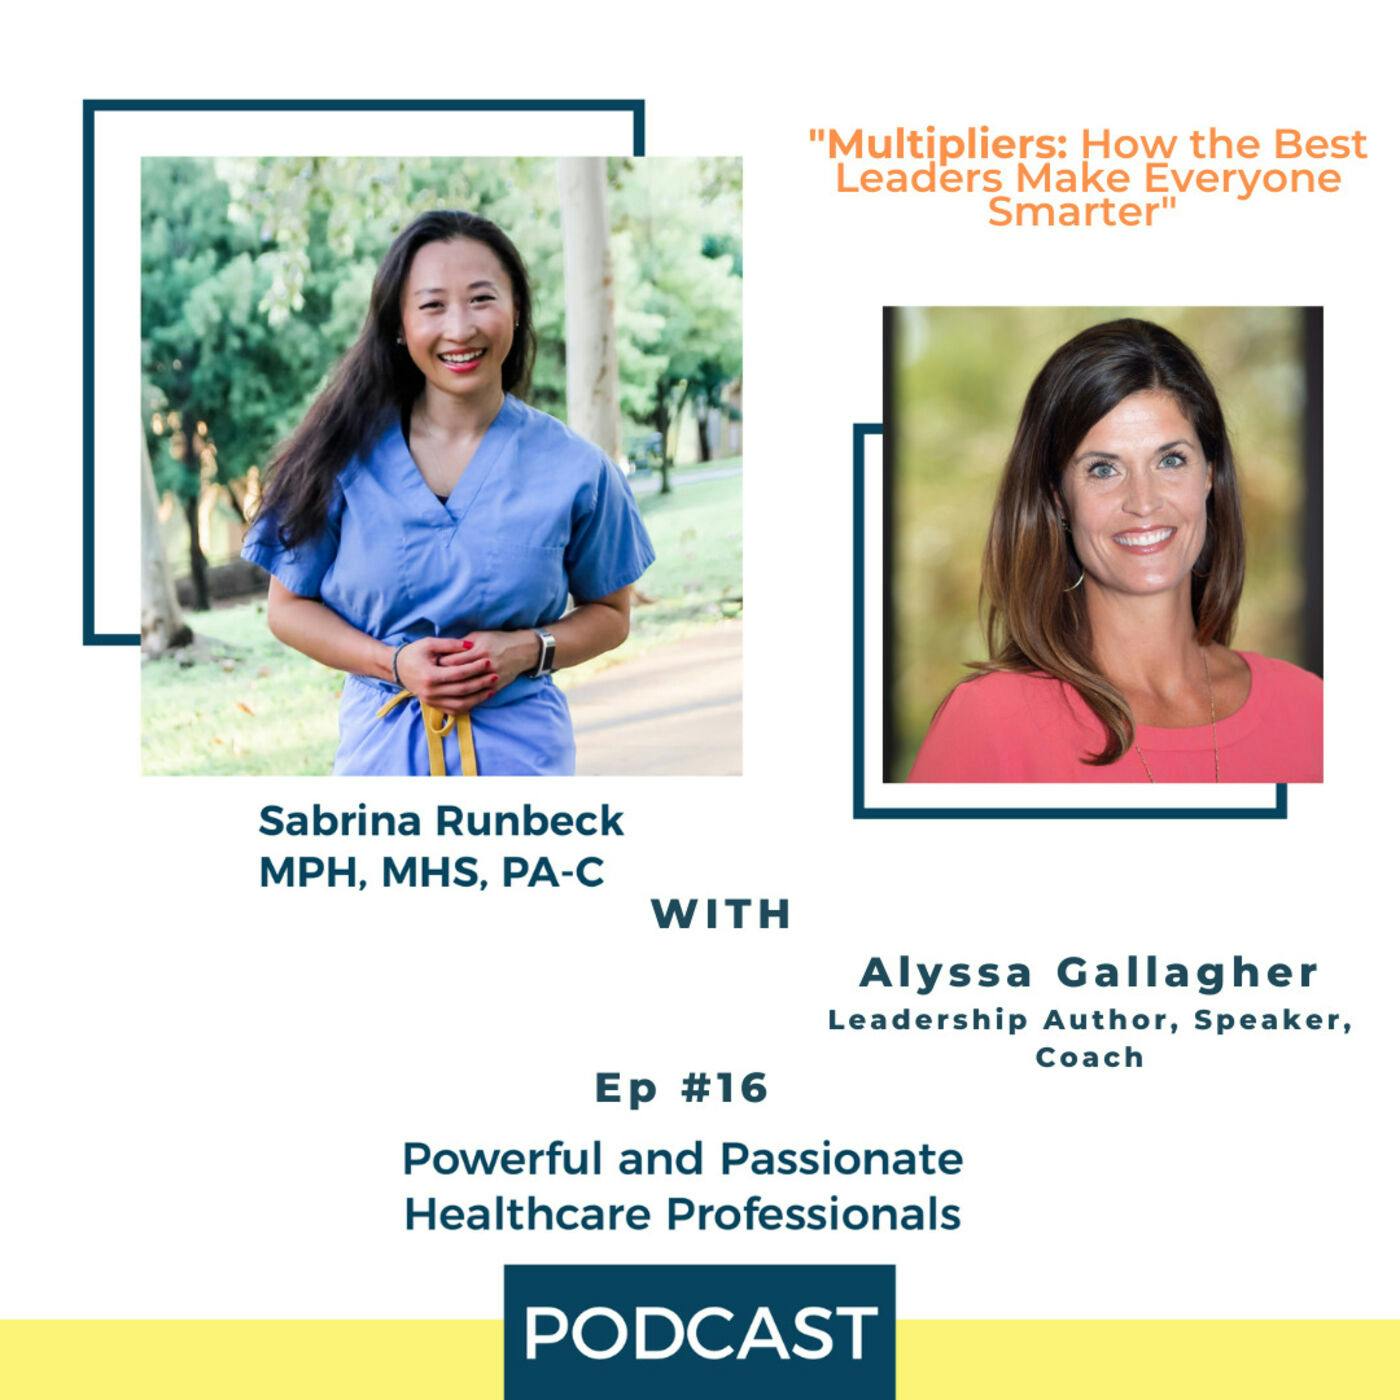 Ep 16 – Multipliers: How the Best Leaders Make Everyone Smarter with Alyssa Gallagher